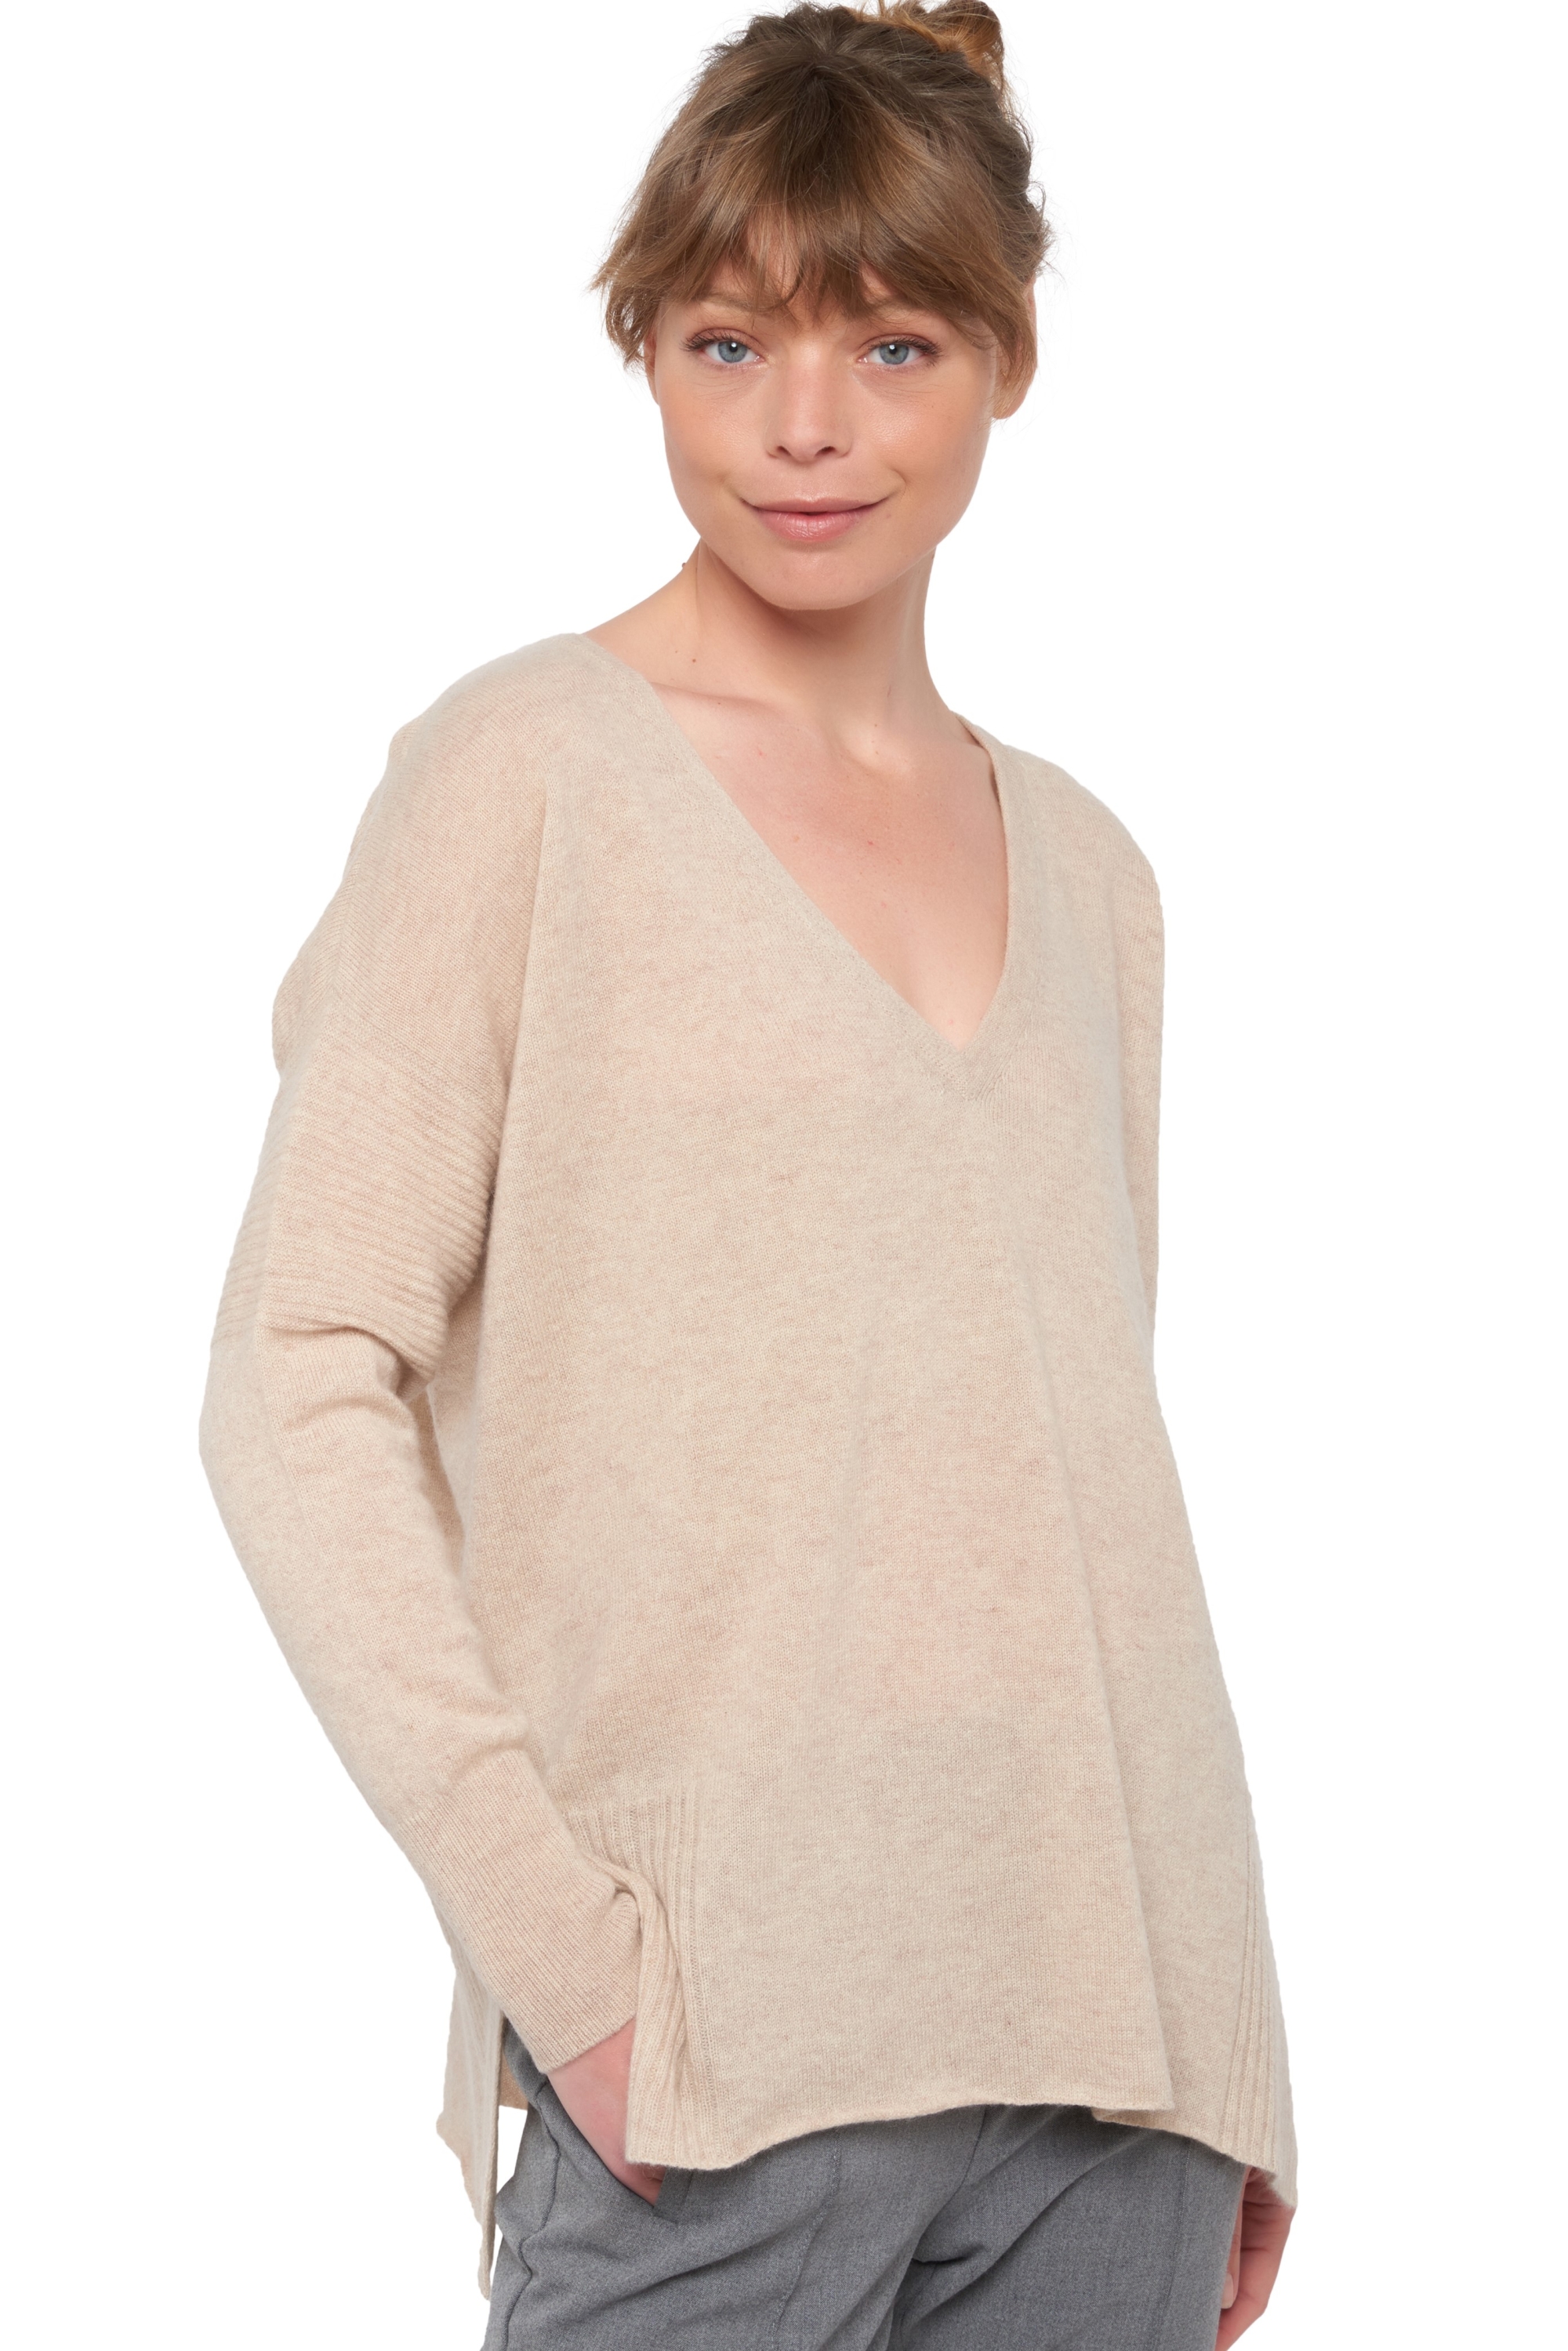 Cashmere ladies spring summer collection uhaina natural beige s